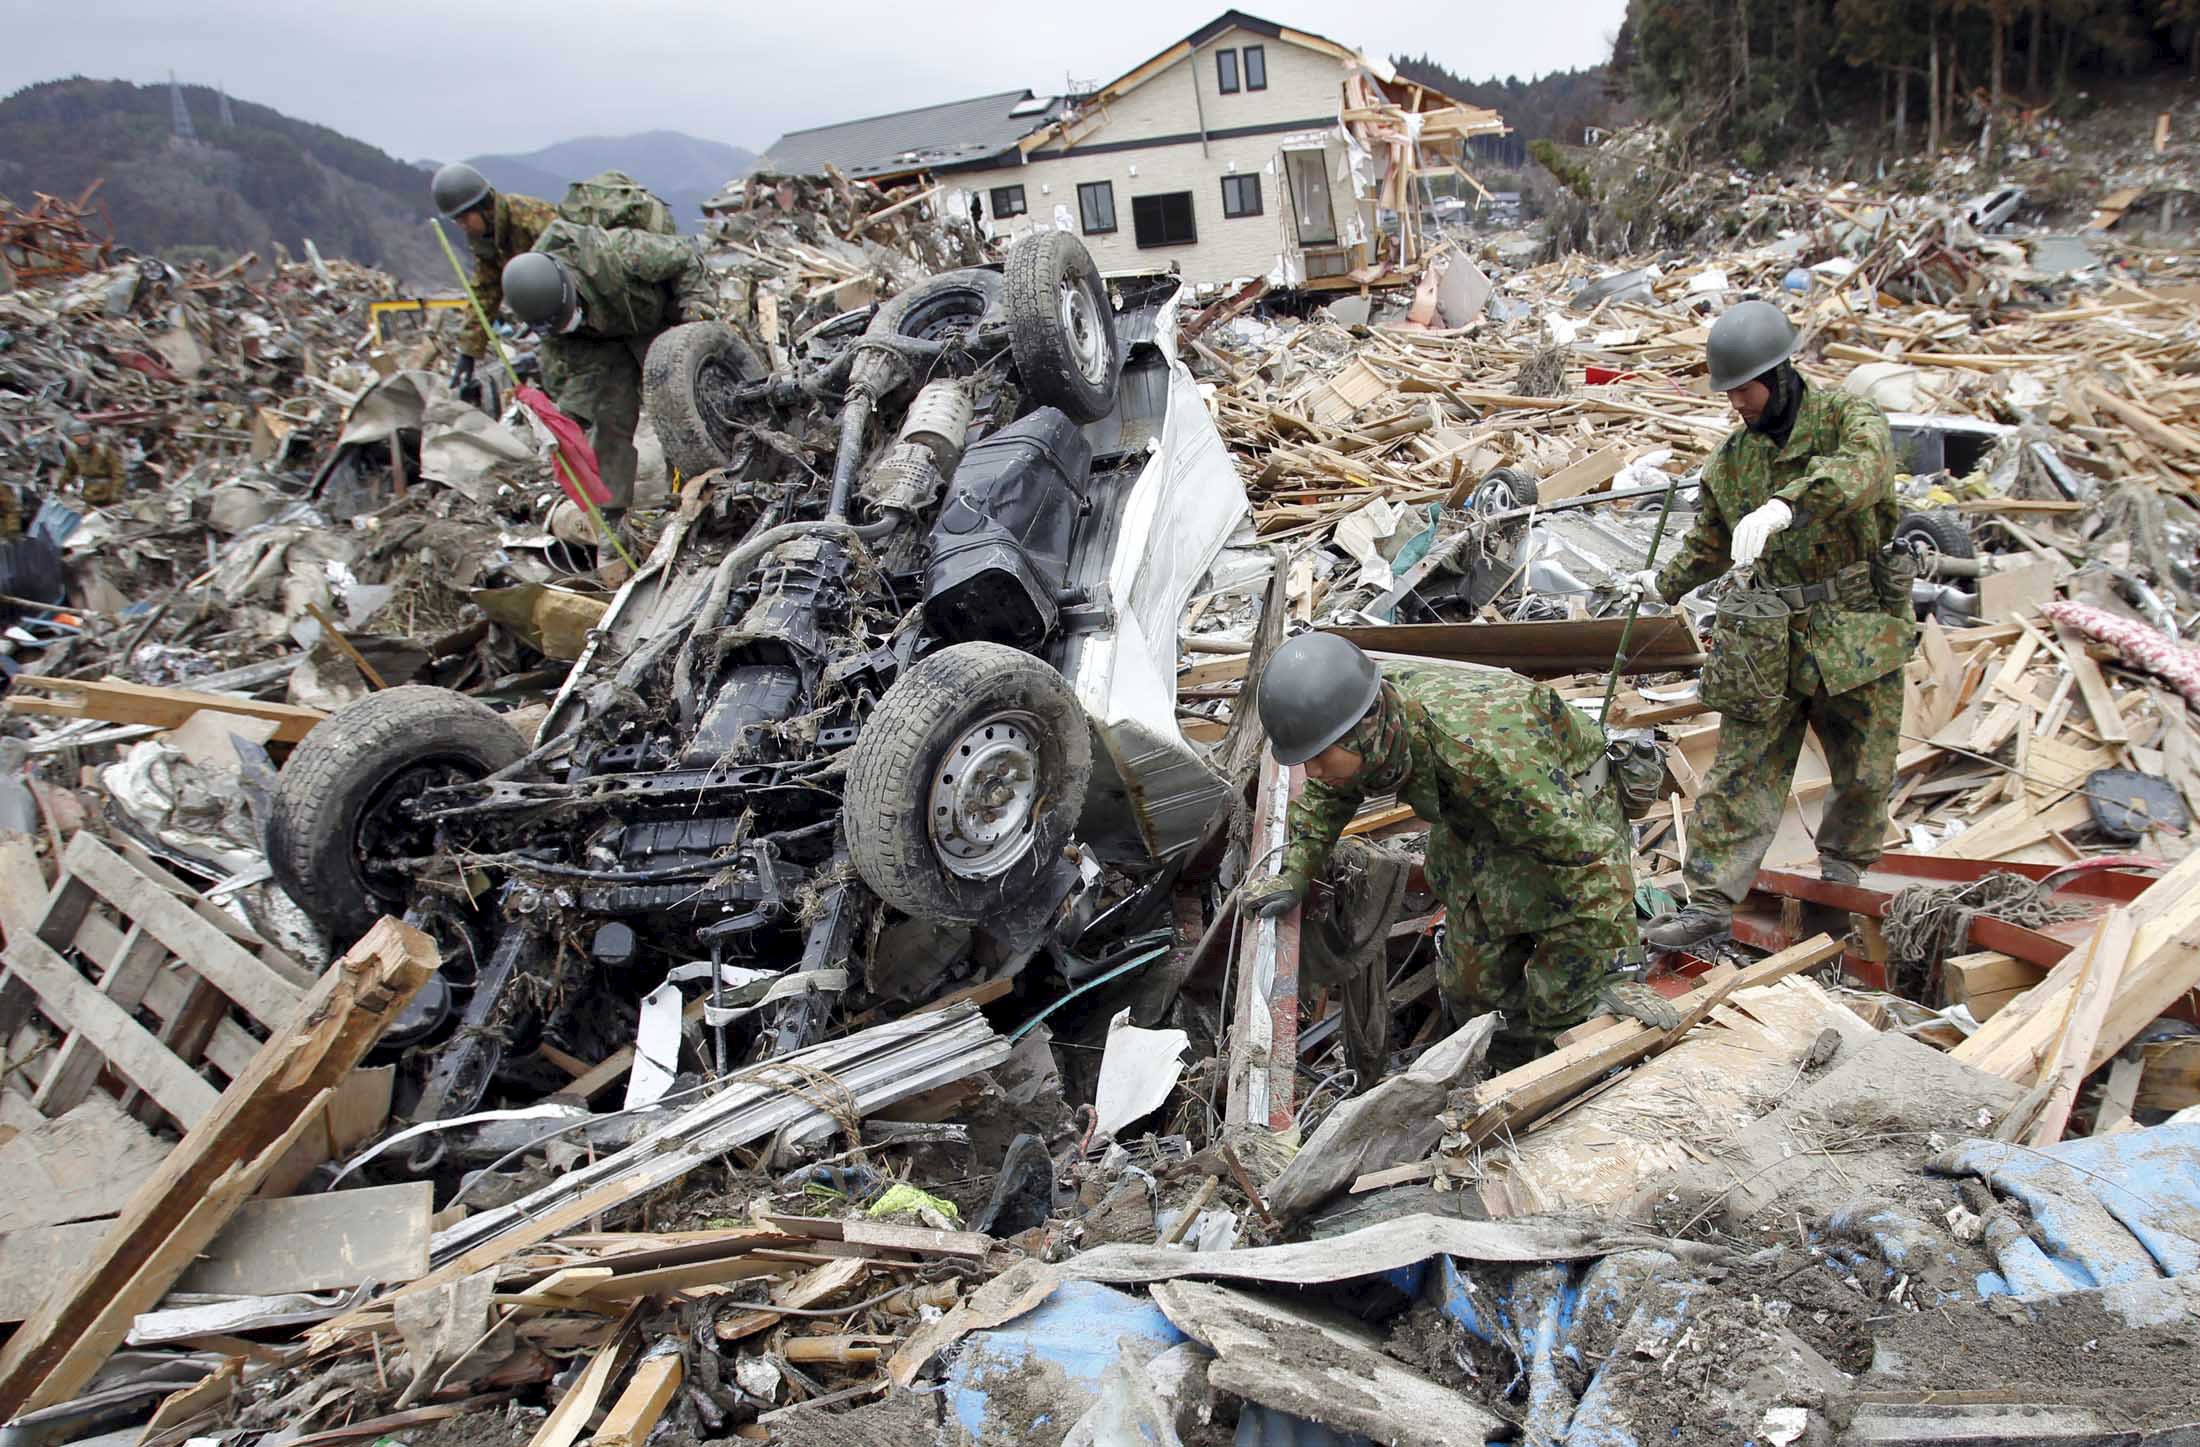 Pain lingers five years on as tsunami-hit Japan town rises from ruins